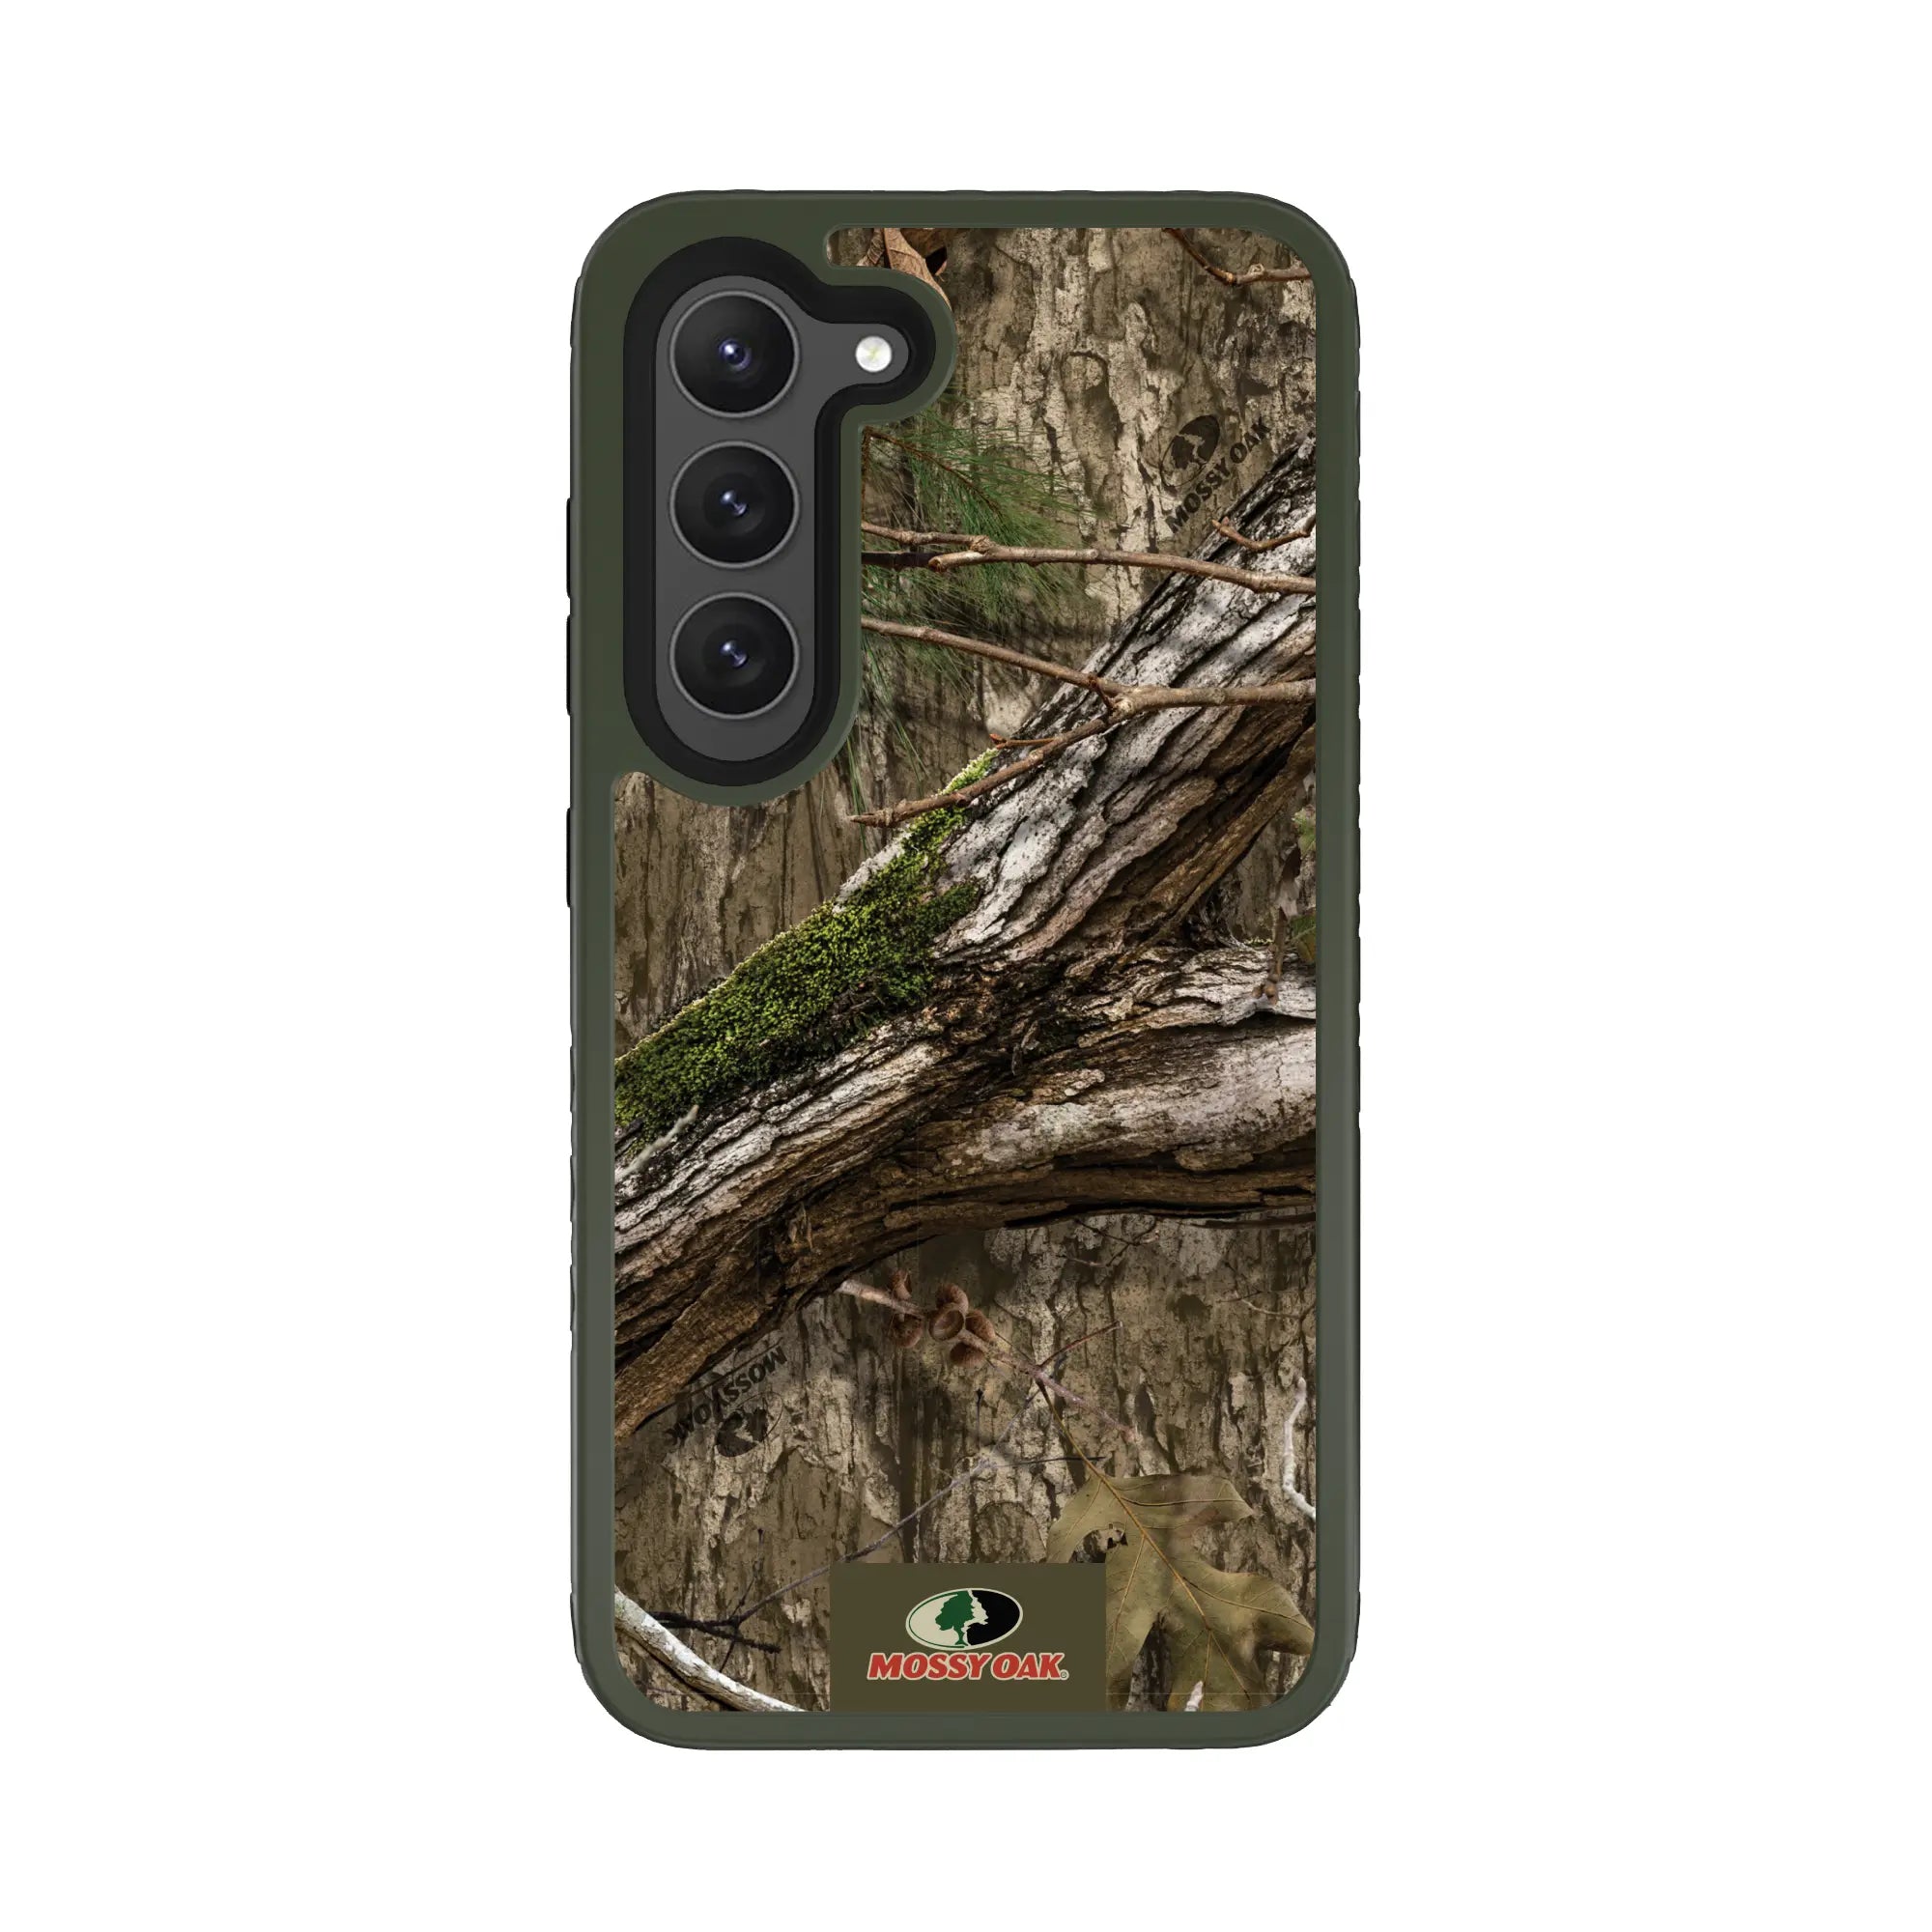 Mossy Oak Fortitude Series for Samsung Galaxy S23 Plus - Country DNA - Custom Case - OliveDrabGreen - cellhelmet